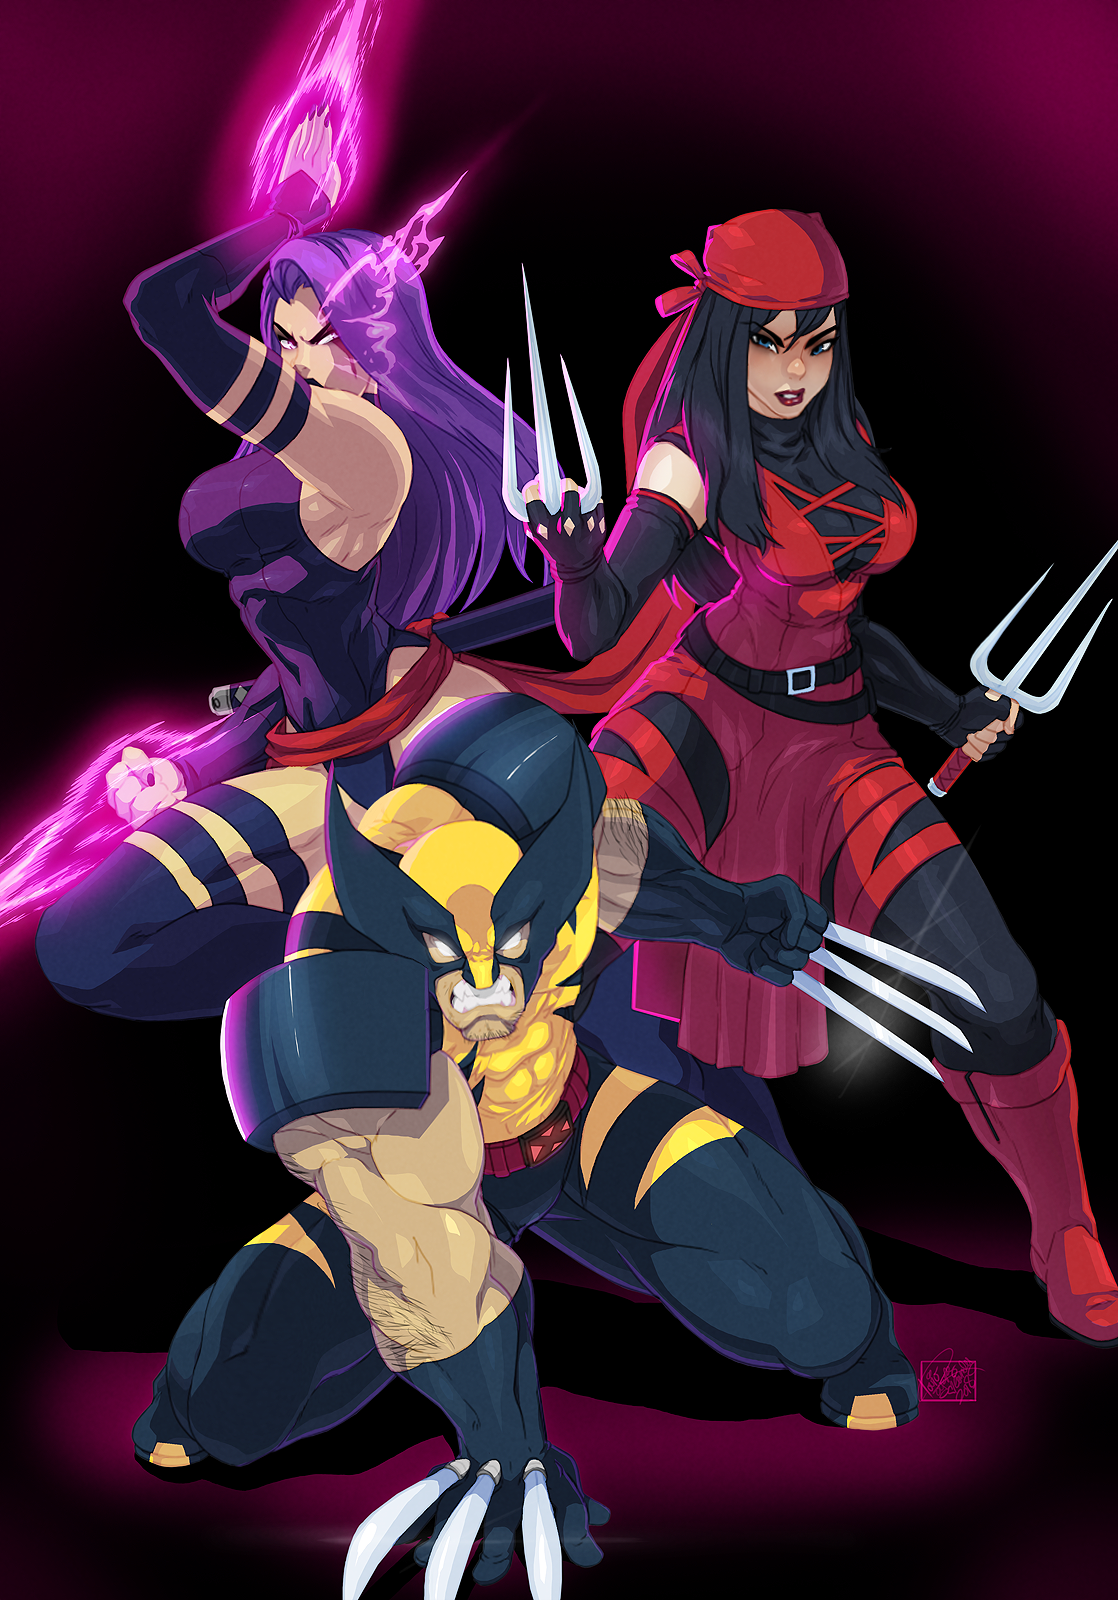 tovio-rogers:  full color commish of marvel’s wolverine, psylocke, and electra